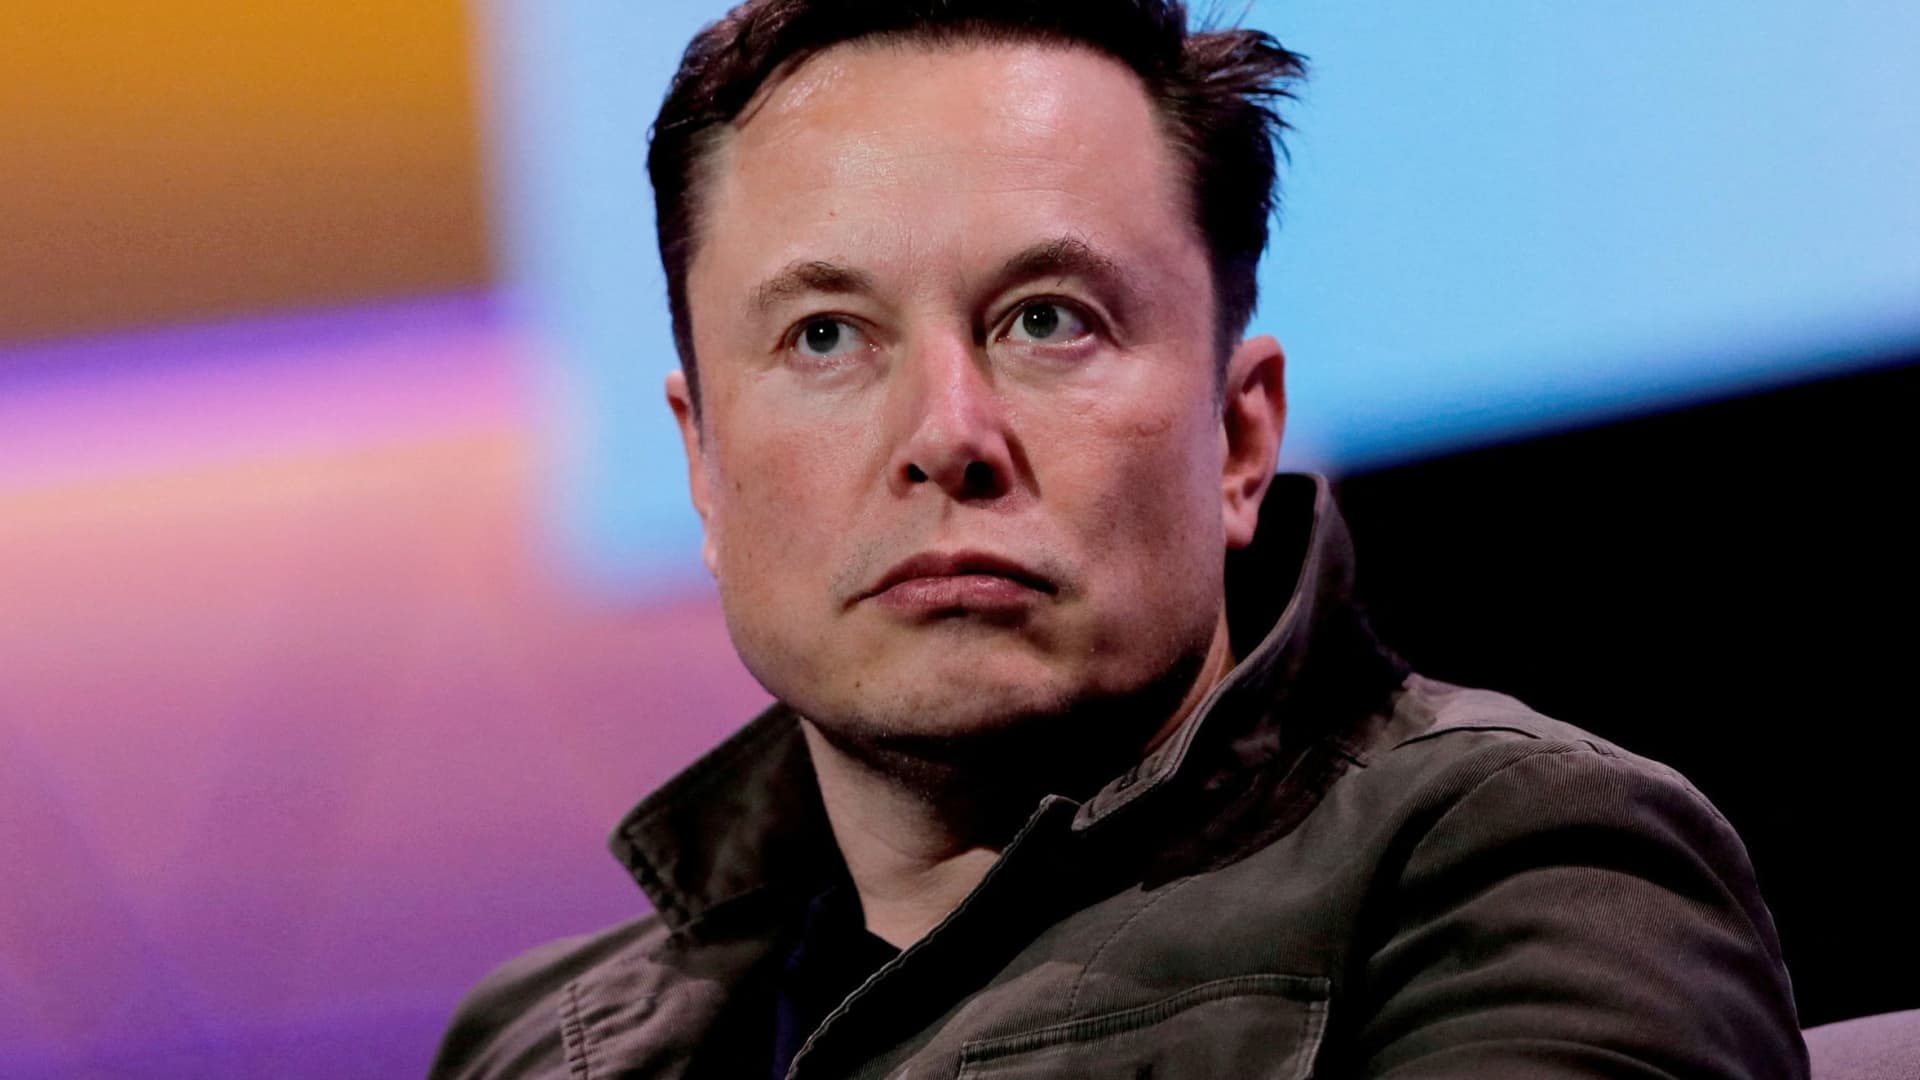 Elon Musk tells Tesla employees don't be 'bothered by stock market craziness'